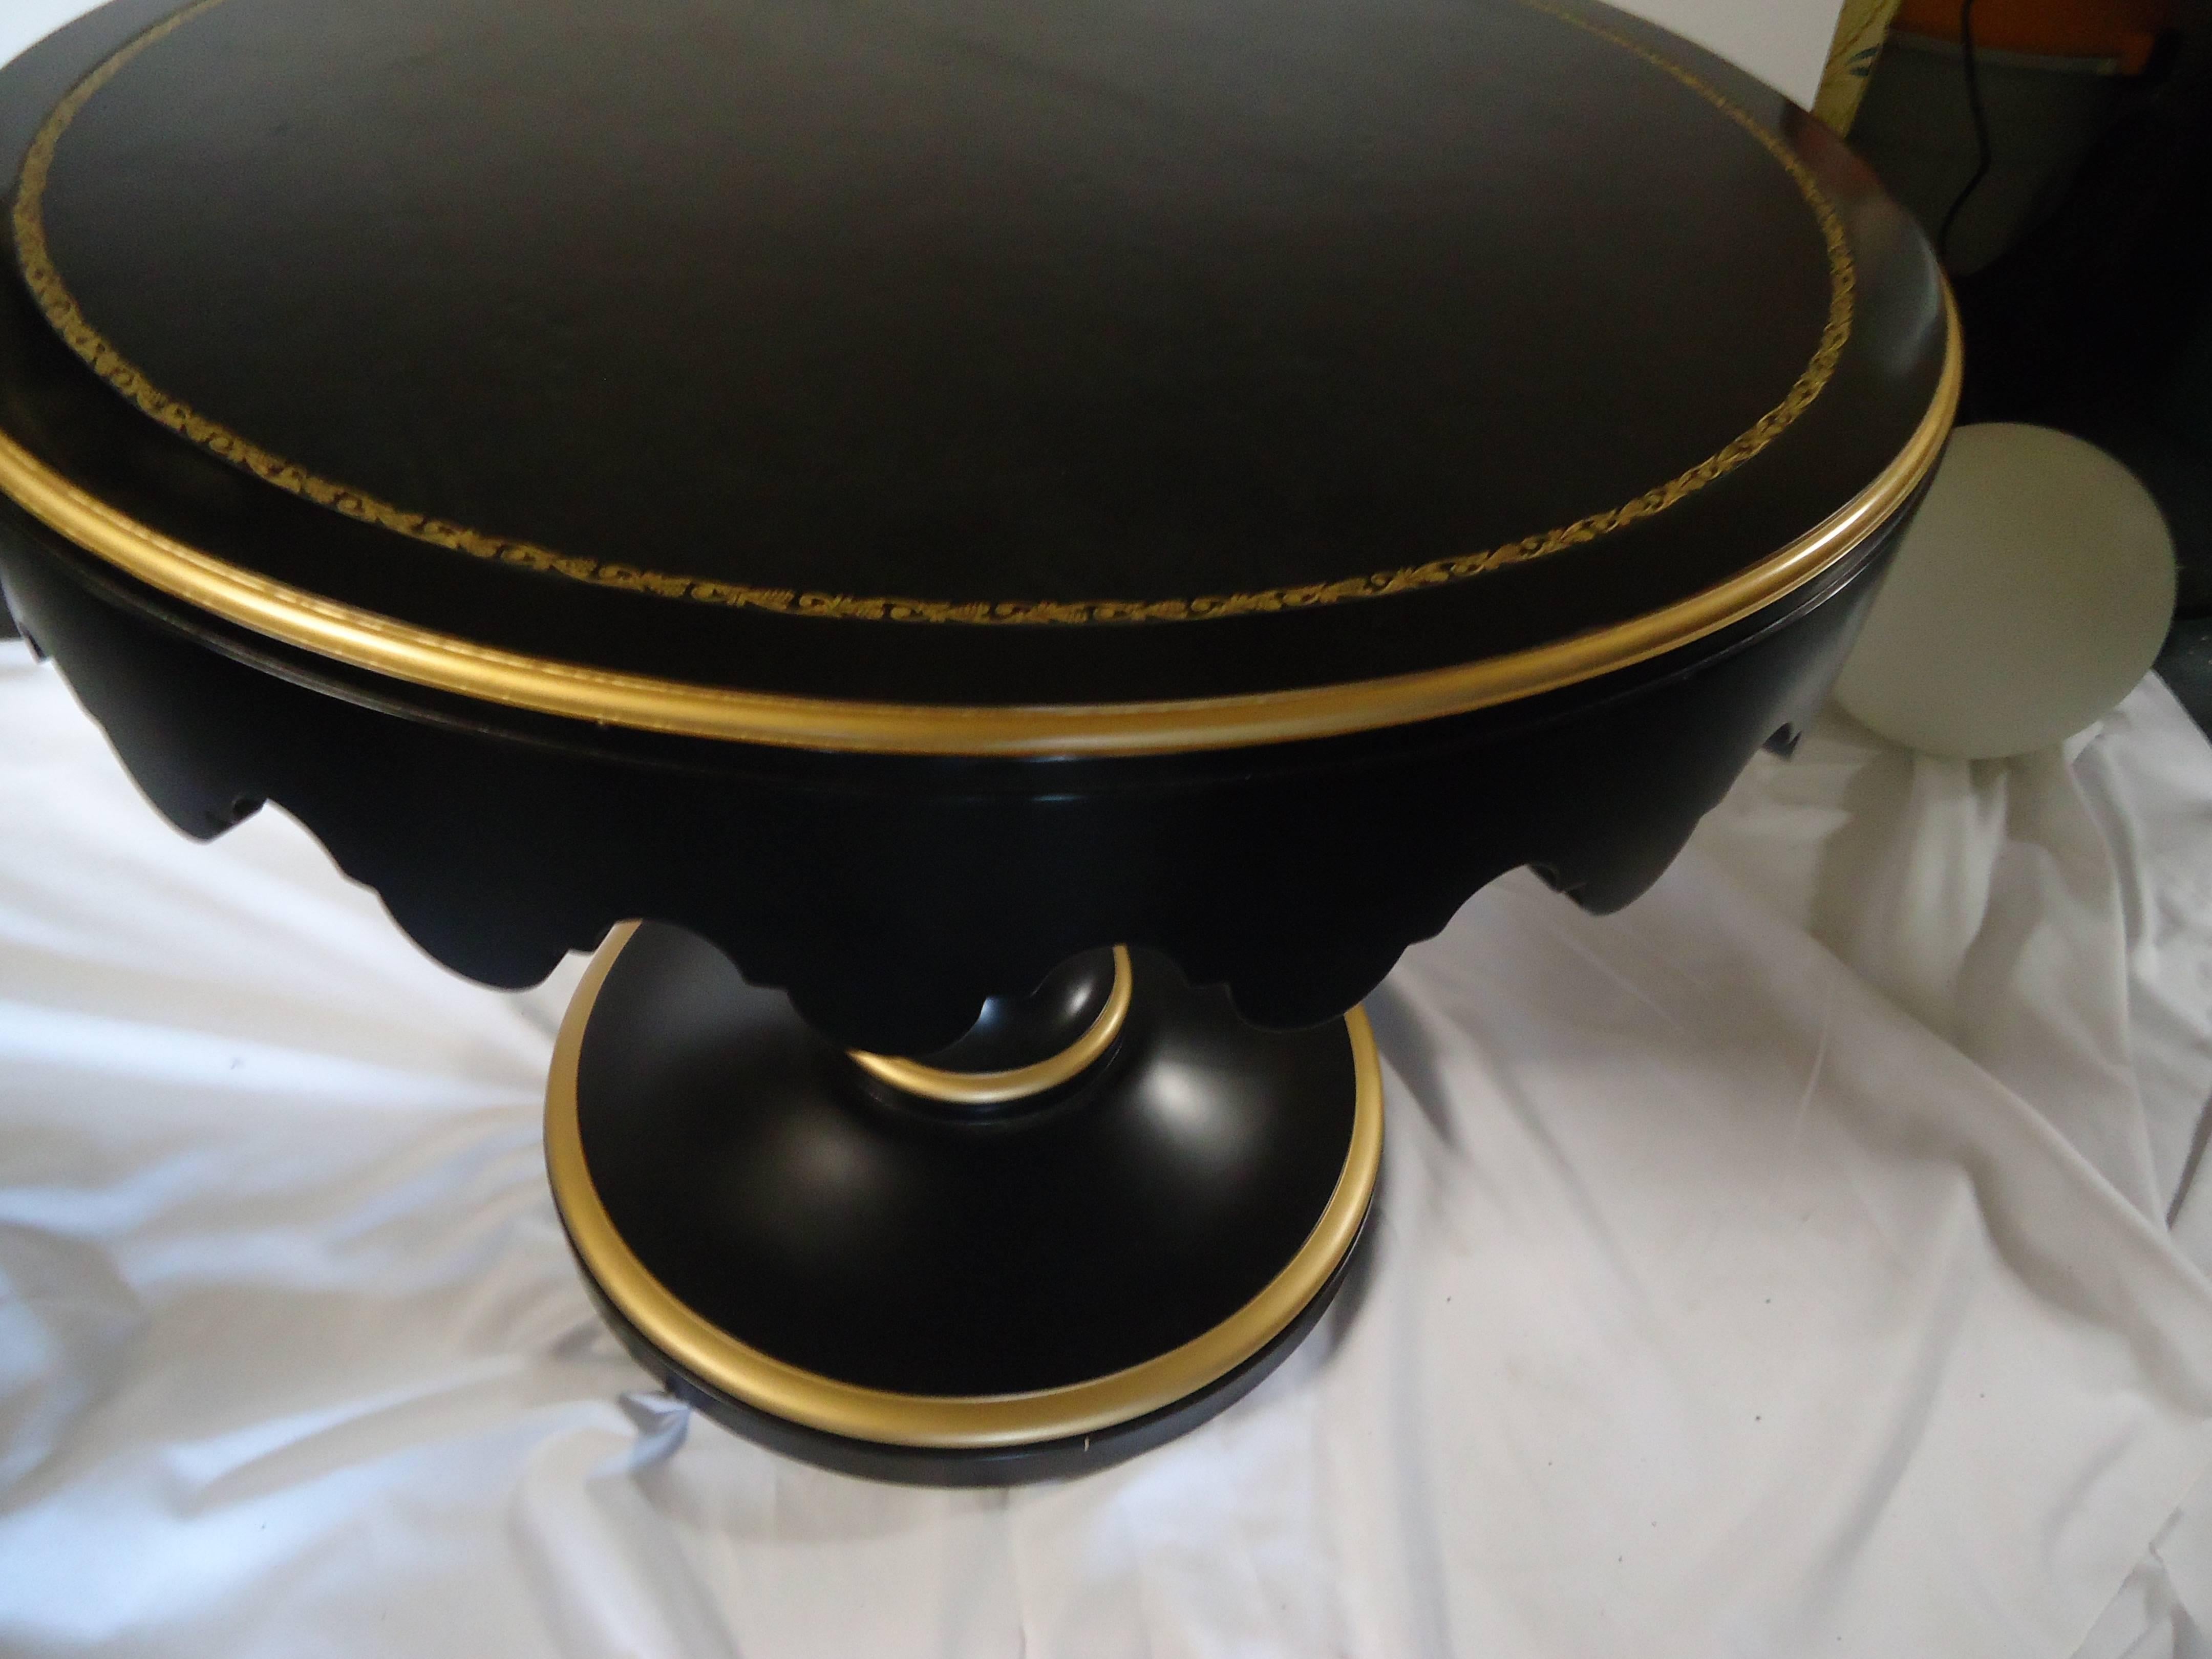 Dramatic round side table or small round table having ebonized wood with gold leaf detailing and black and gold tooled leather top. About 8 years old.